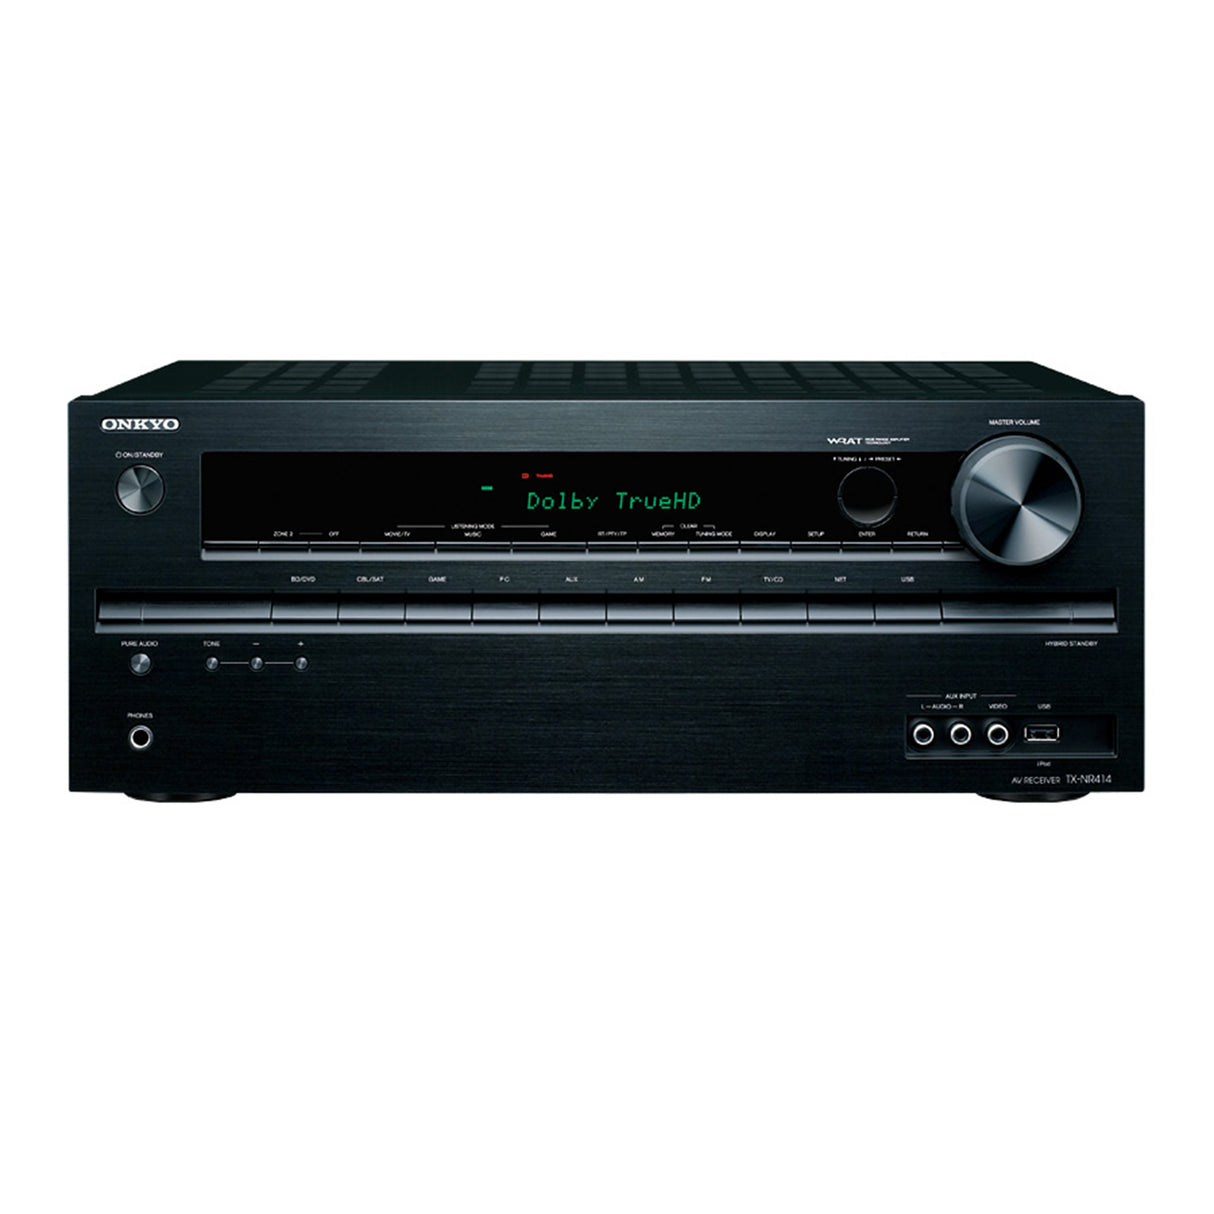 Onkyo TX-NR 414 - 5.1 Channel Network AV Receiver (Demo Unit / Without Box Unit)